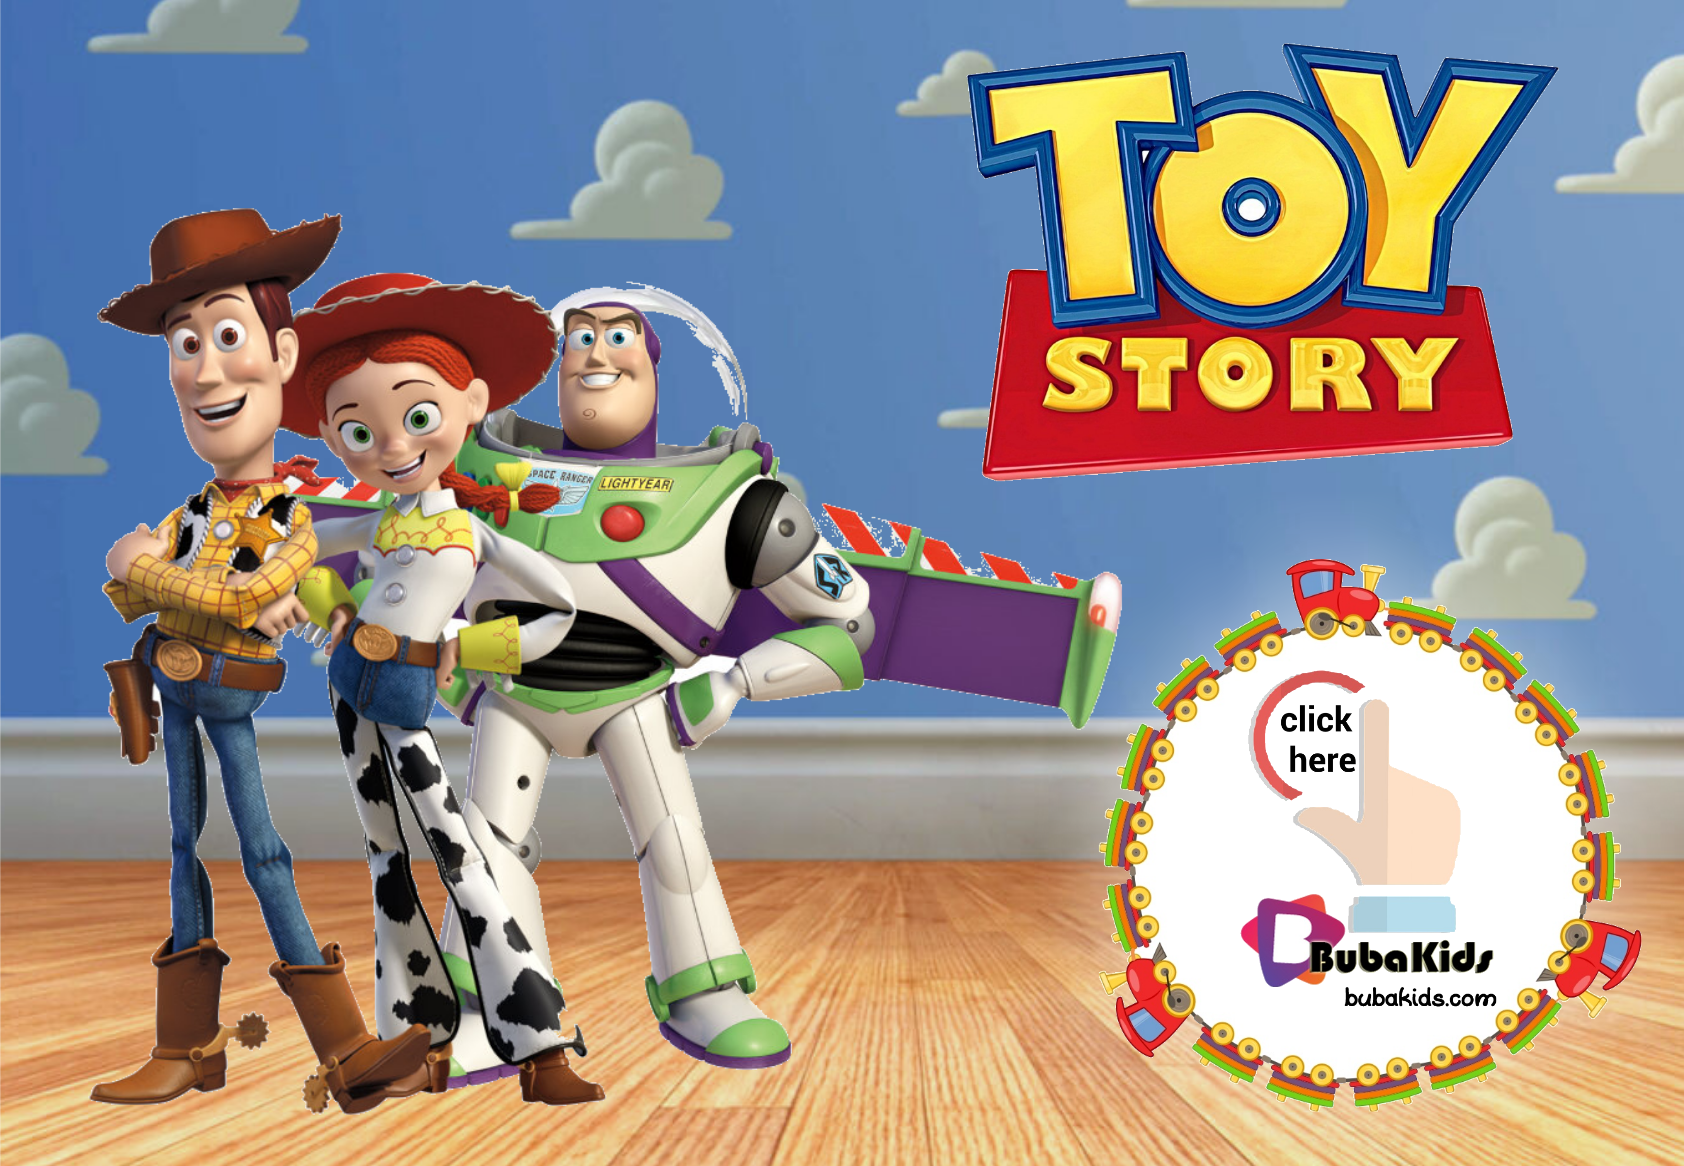 Toy Story invitation card template free and printable. Wallpaper